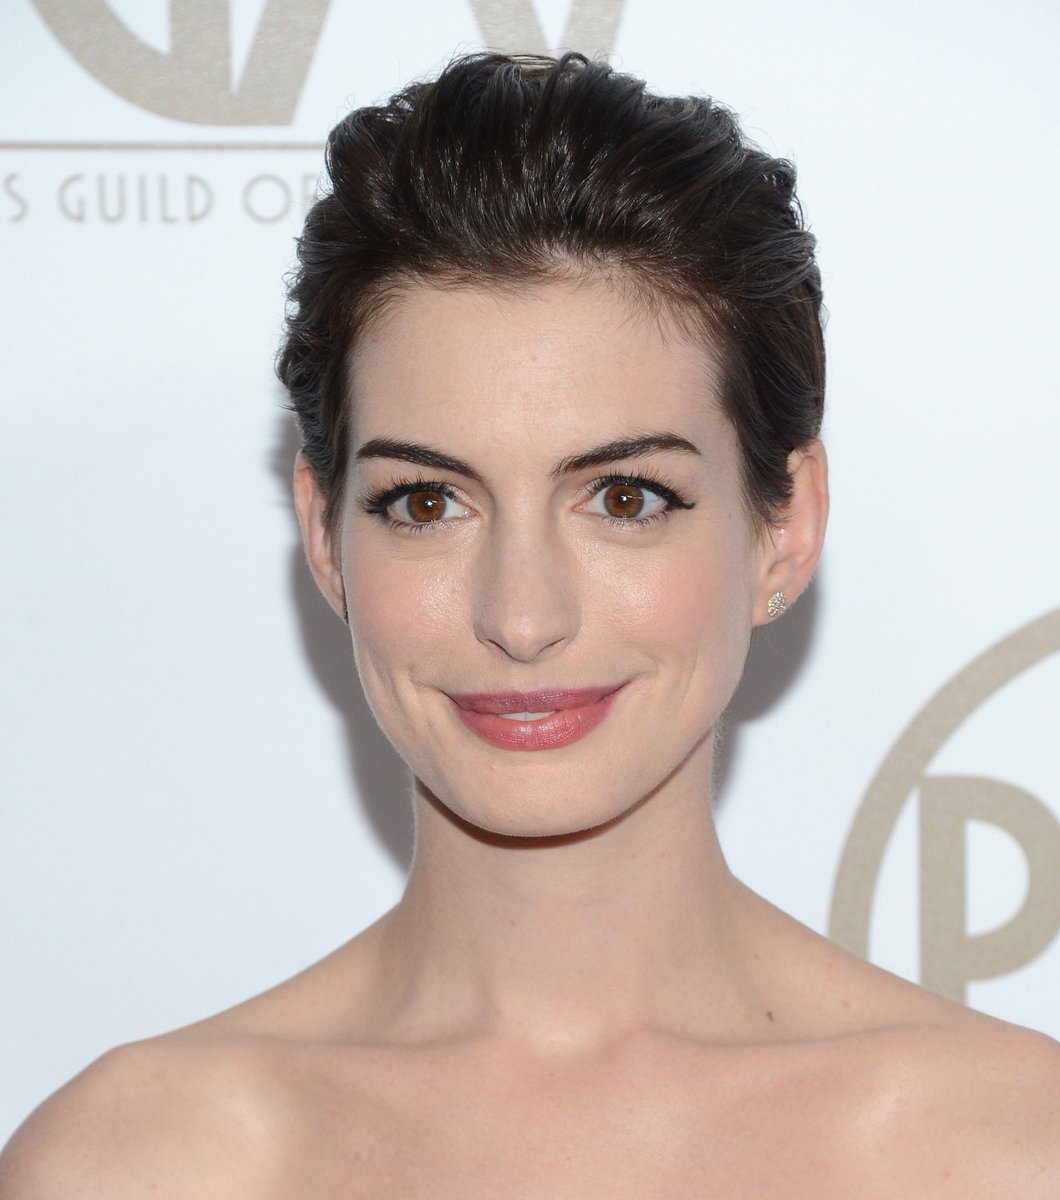 Anne Doing Things On Twitter Anne Hathaway Rocking Short Hair